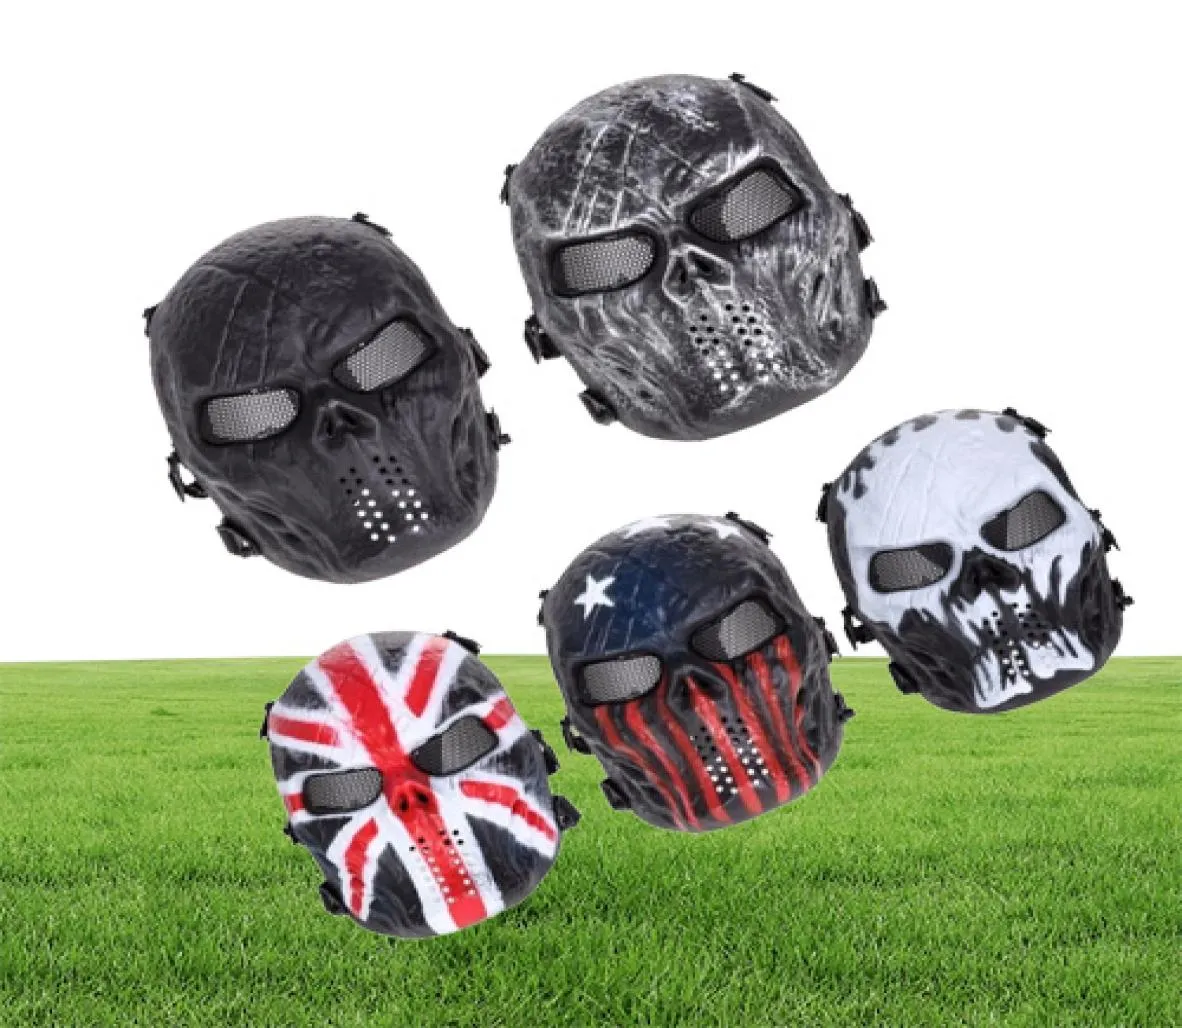 Airsoft Paintball Party Mask Skull Full Face Mask Army Games Outdoor Metal Mesh Eye Shield Costume for Halloween Party Supplies Y21965038